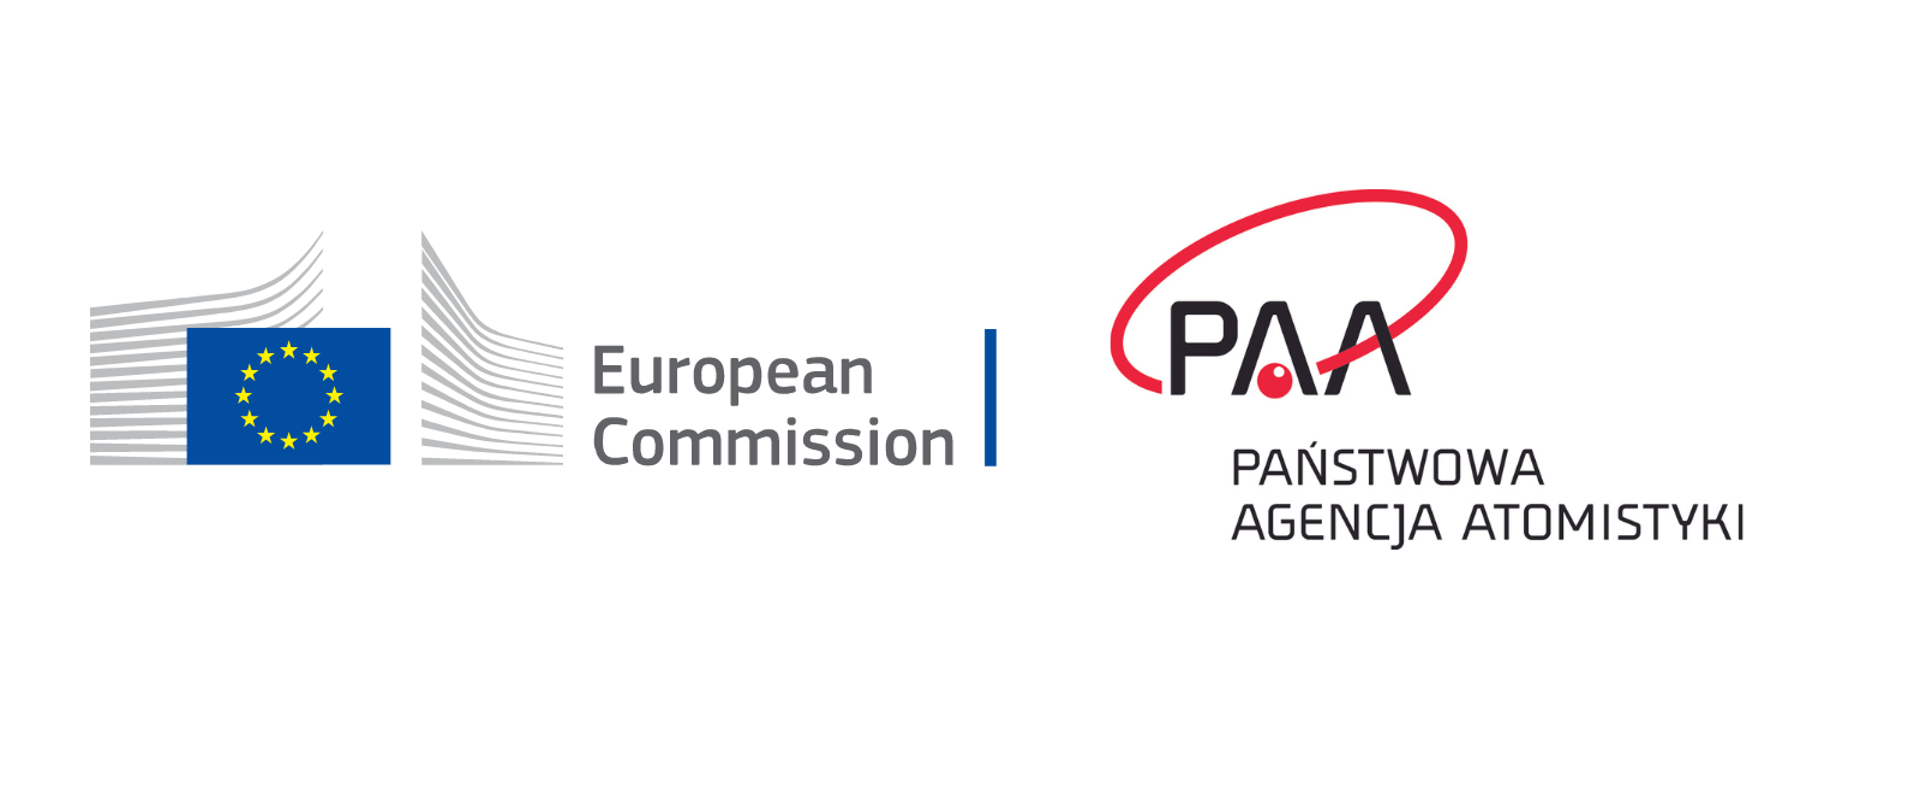 Logotypes of the European Commission and PAA